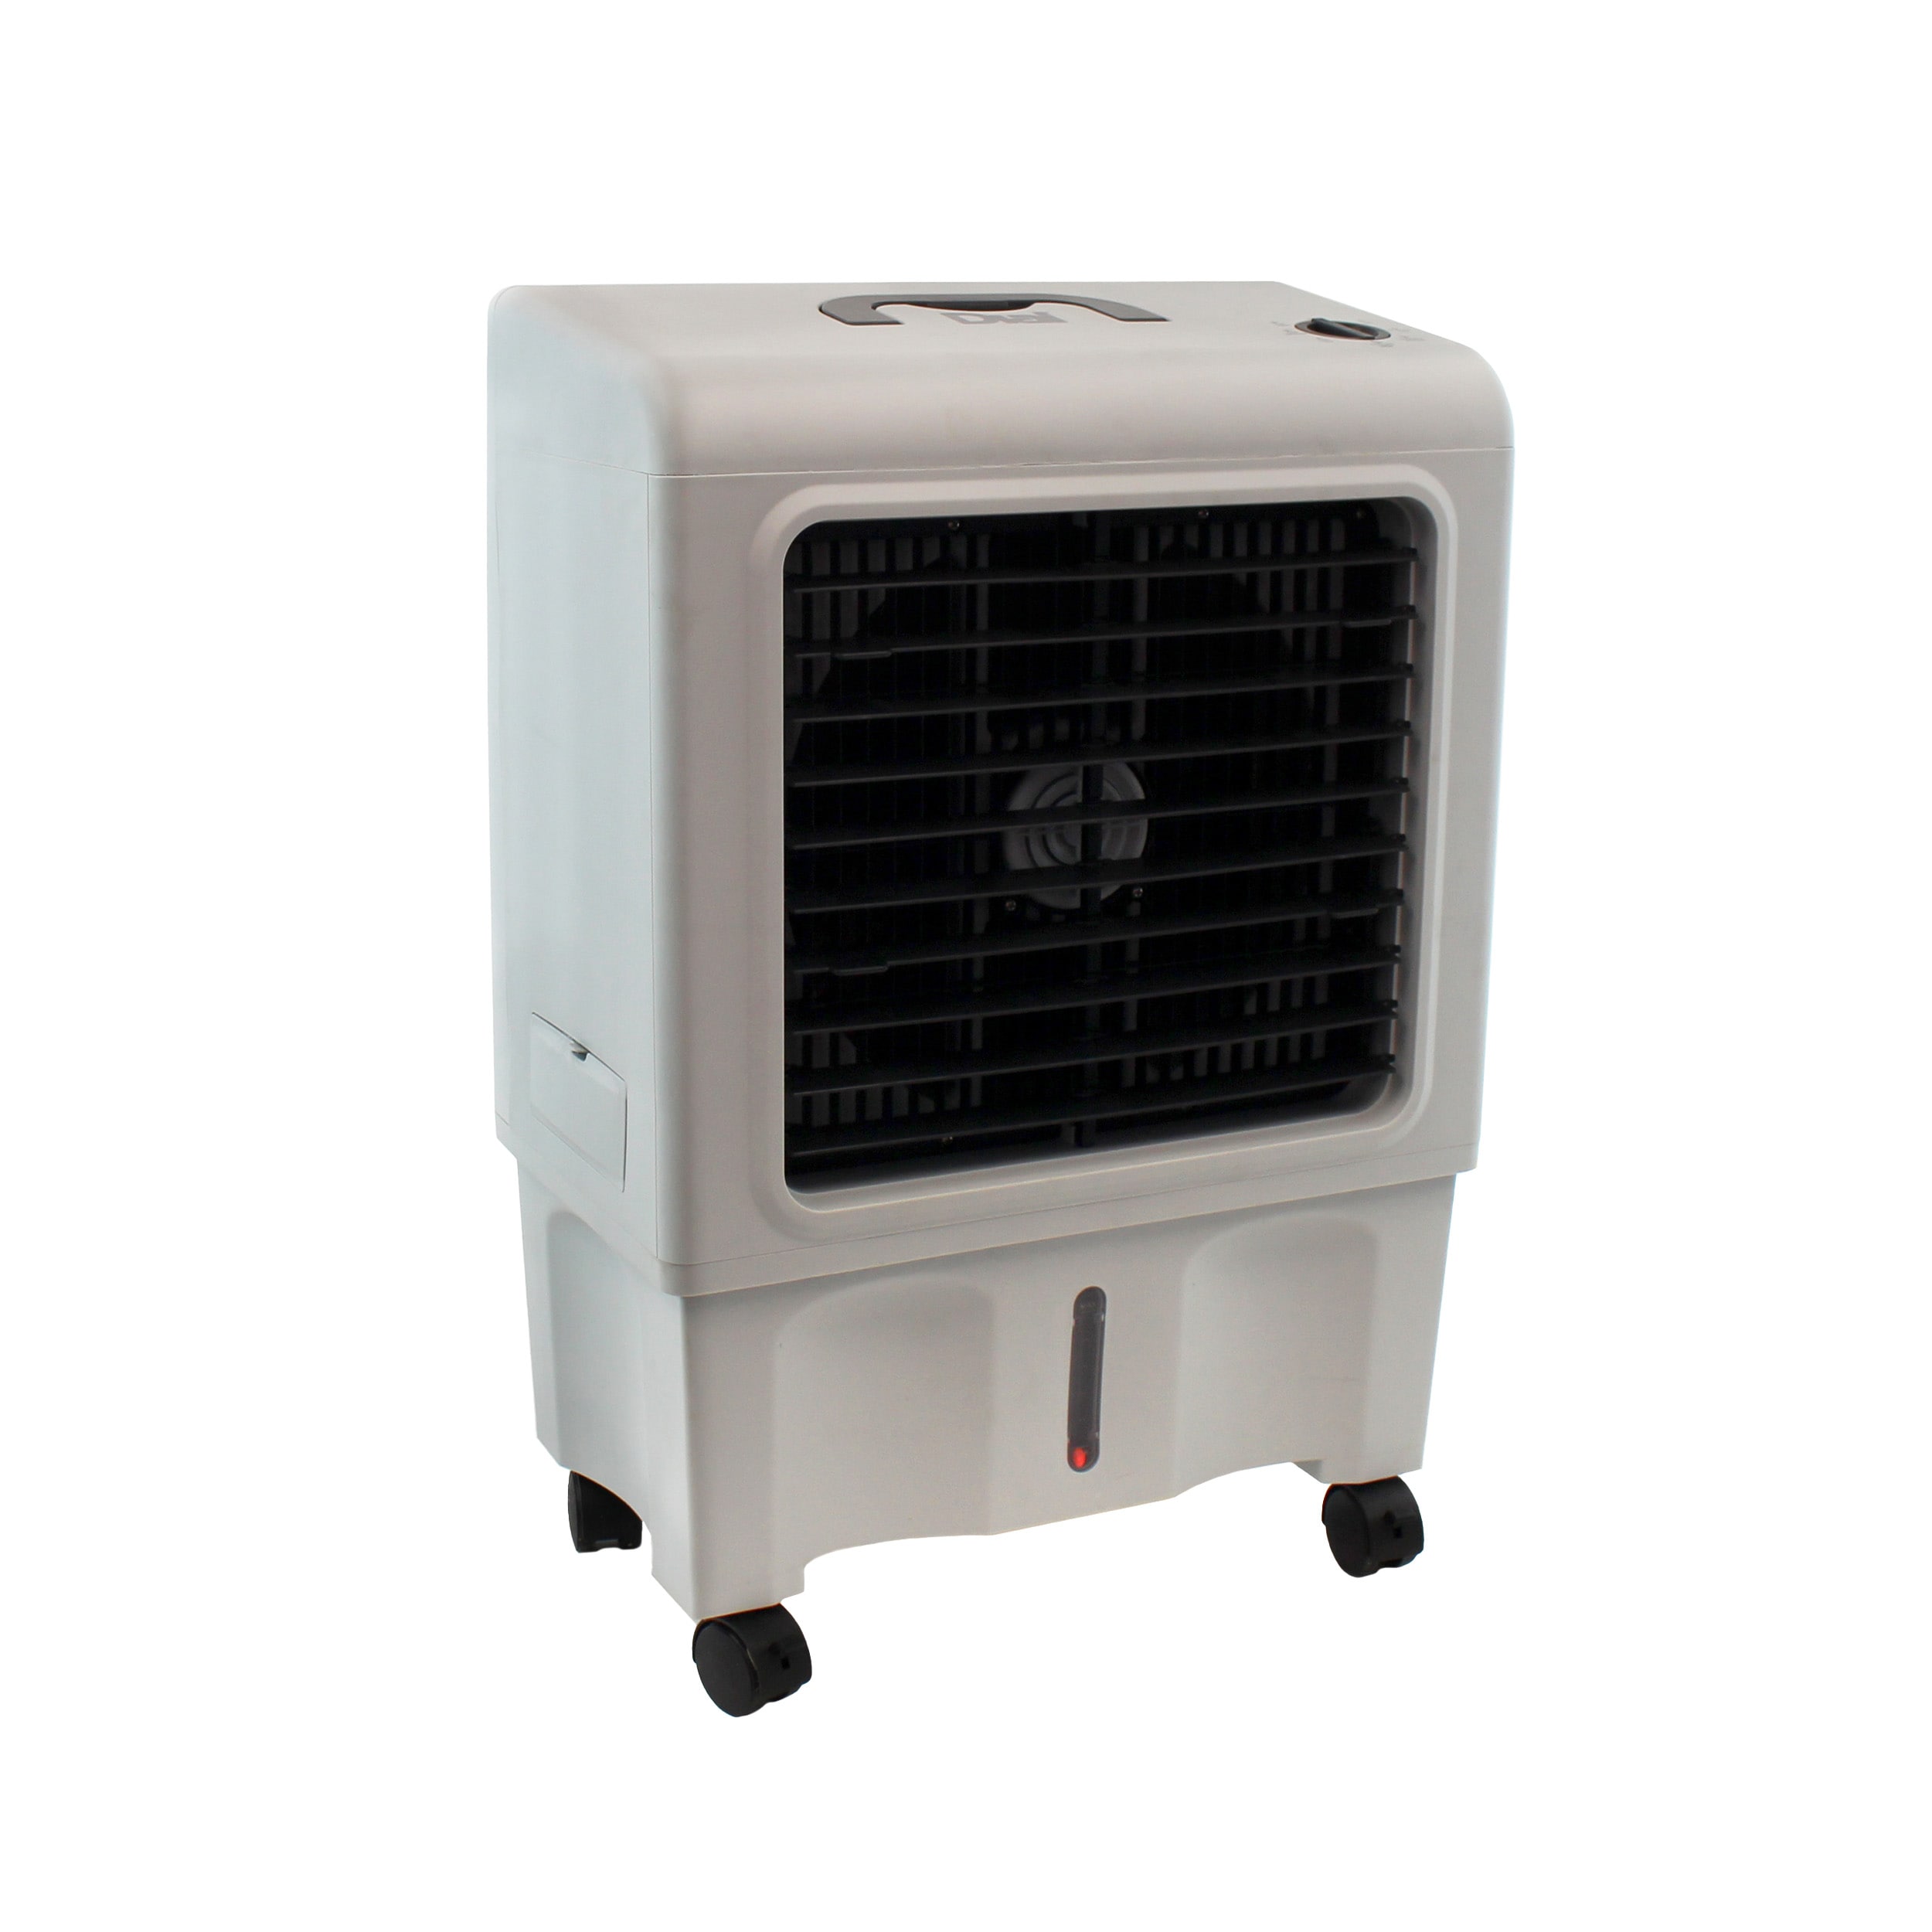 Birsppy 3-IN-1 Evaporative Air Cooler  Birsppy Portable Mini Air  Conditioner Cooler 